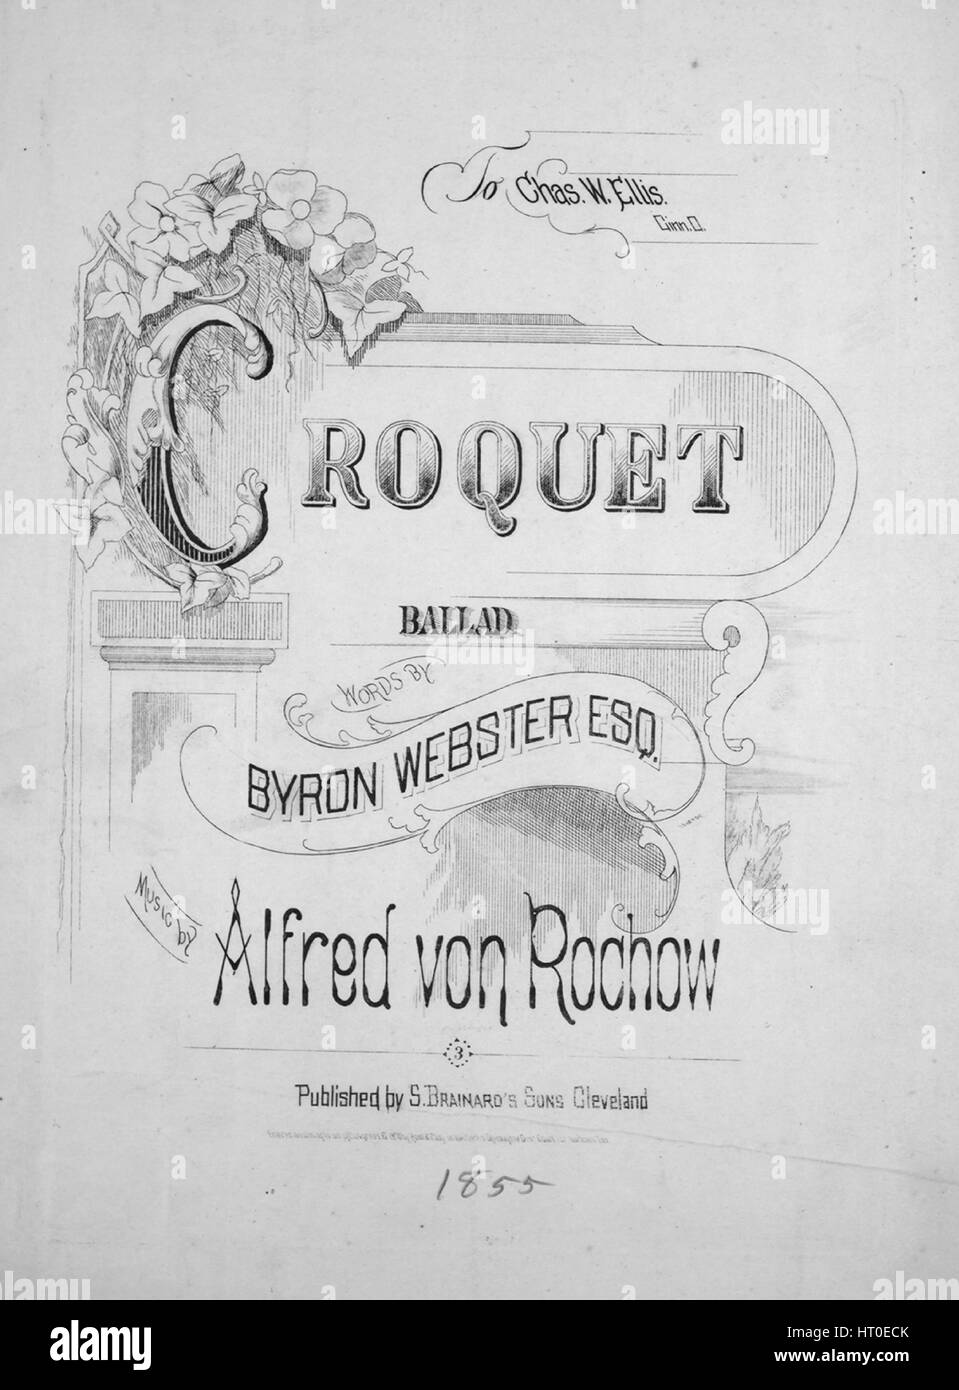 Sheet music cover image of the song 'Croquet Ballad', with original authorship notes reading 'Words by Byron Webster, Esq Music by Alfred von Rochow', United States, 1855. The publisher is listed as 'S. Brainard's Sons', the form of composition is 'strophic with chorus', the instrumentation is 'piano and voice', the first line reads 'Out on the green lawn in the winsome May, forgetting the moments that drifted by', and the illustration artist is listed as 'Murray'. Stock Photo